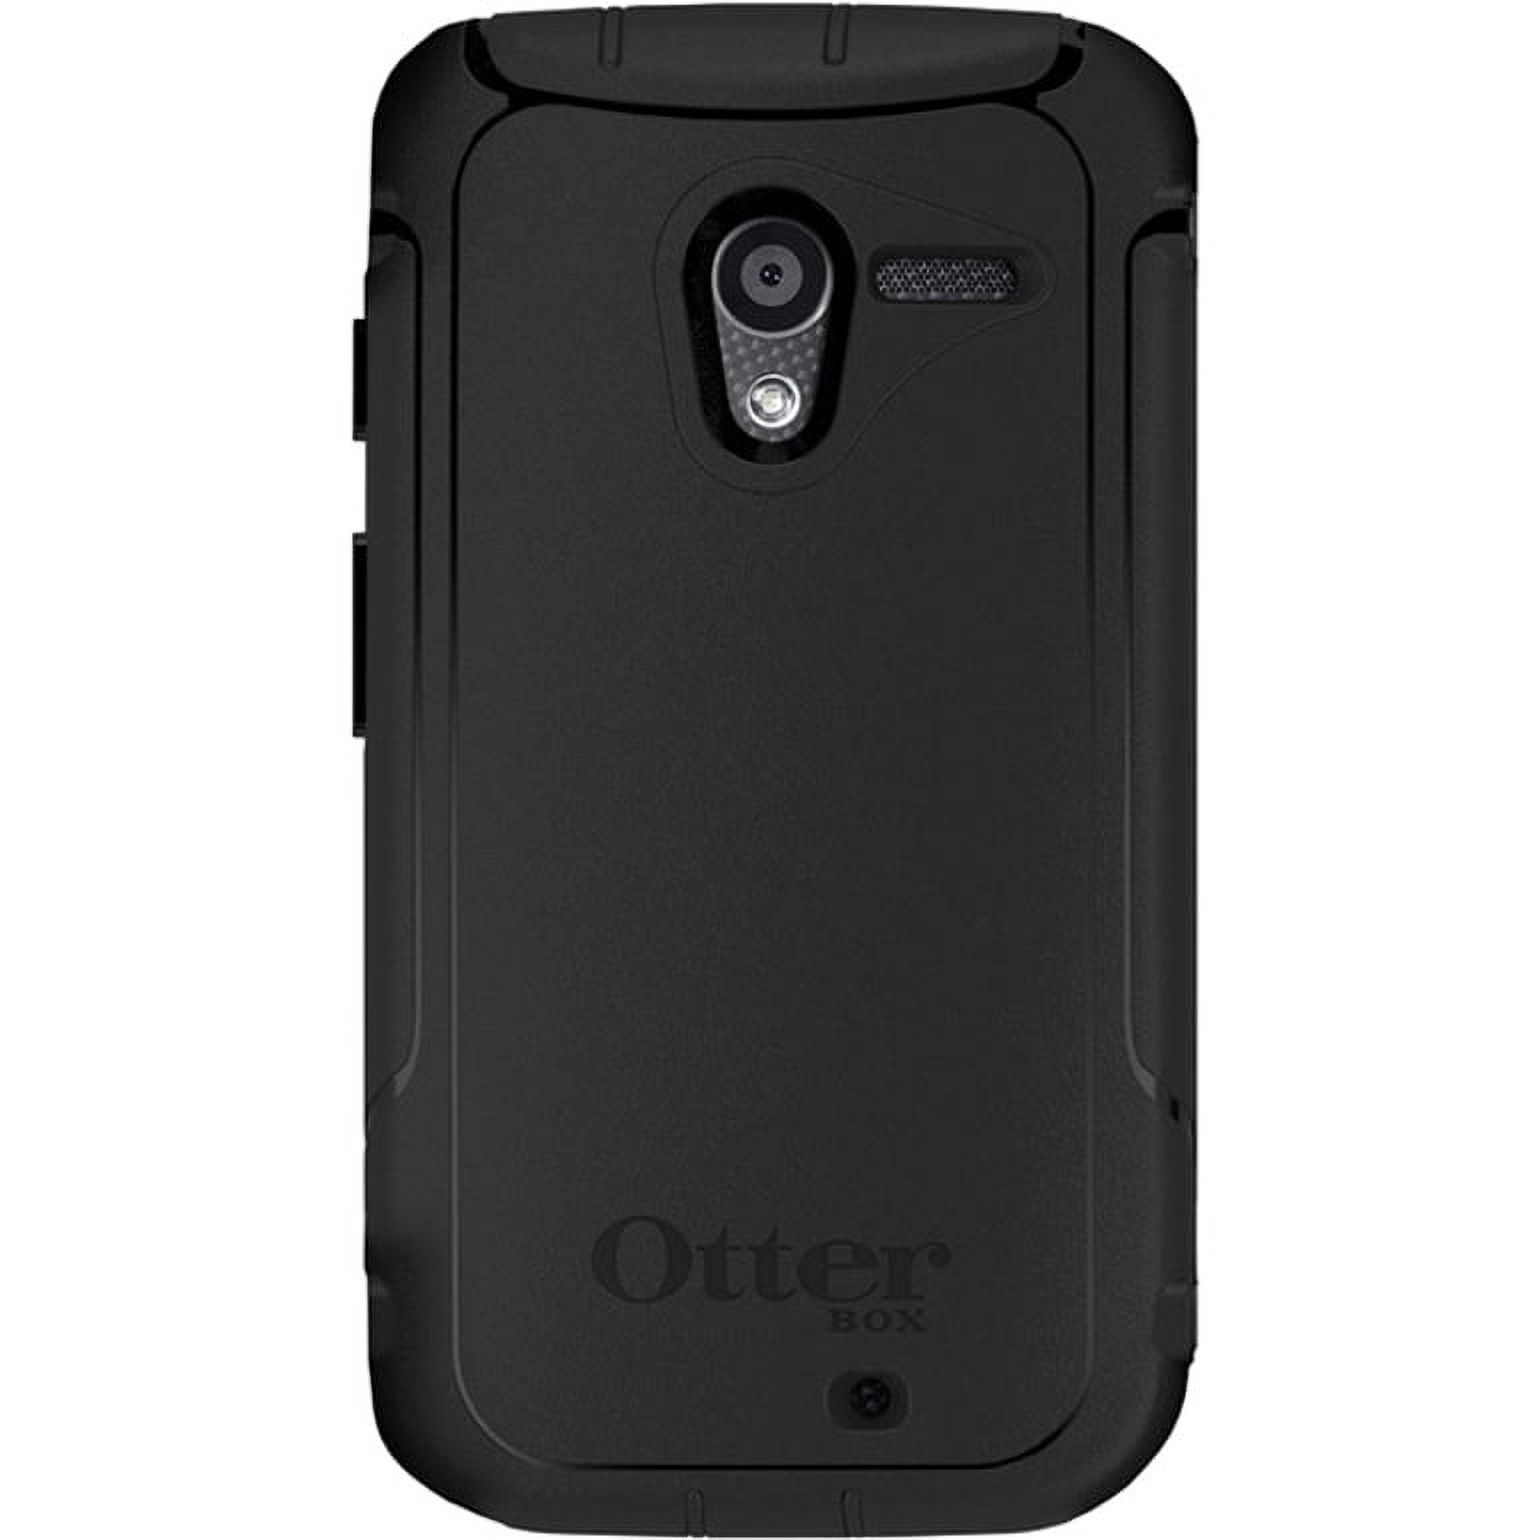 OtterBox Defender Carrying Case Rugged (Holster) Smartphone, Black - image 1 of 5